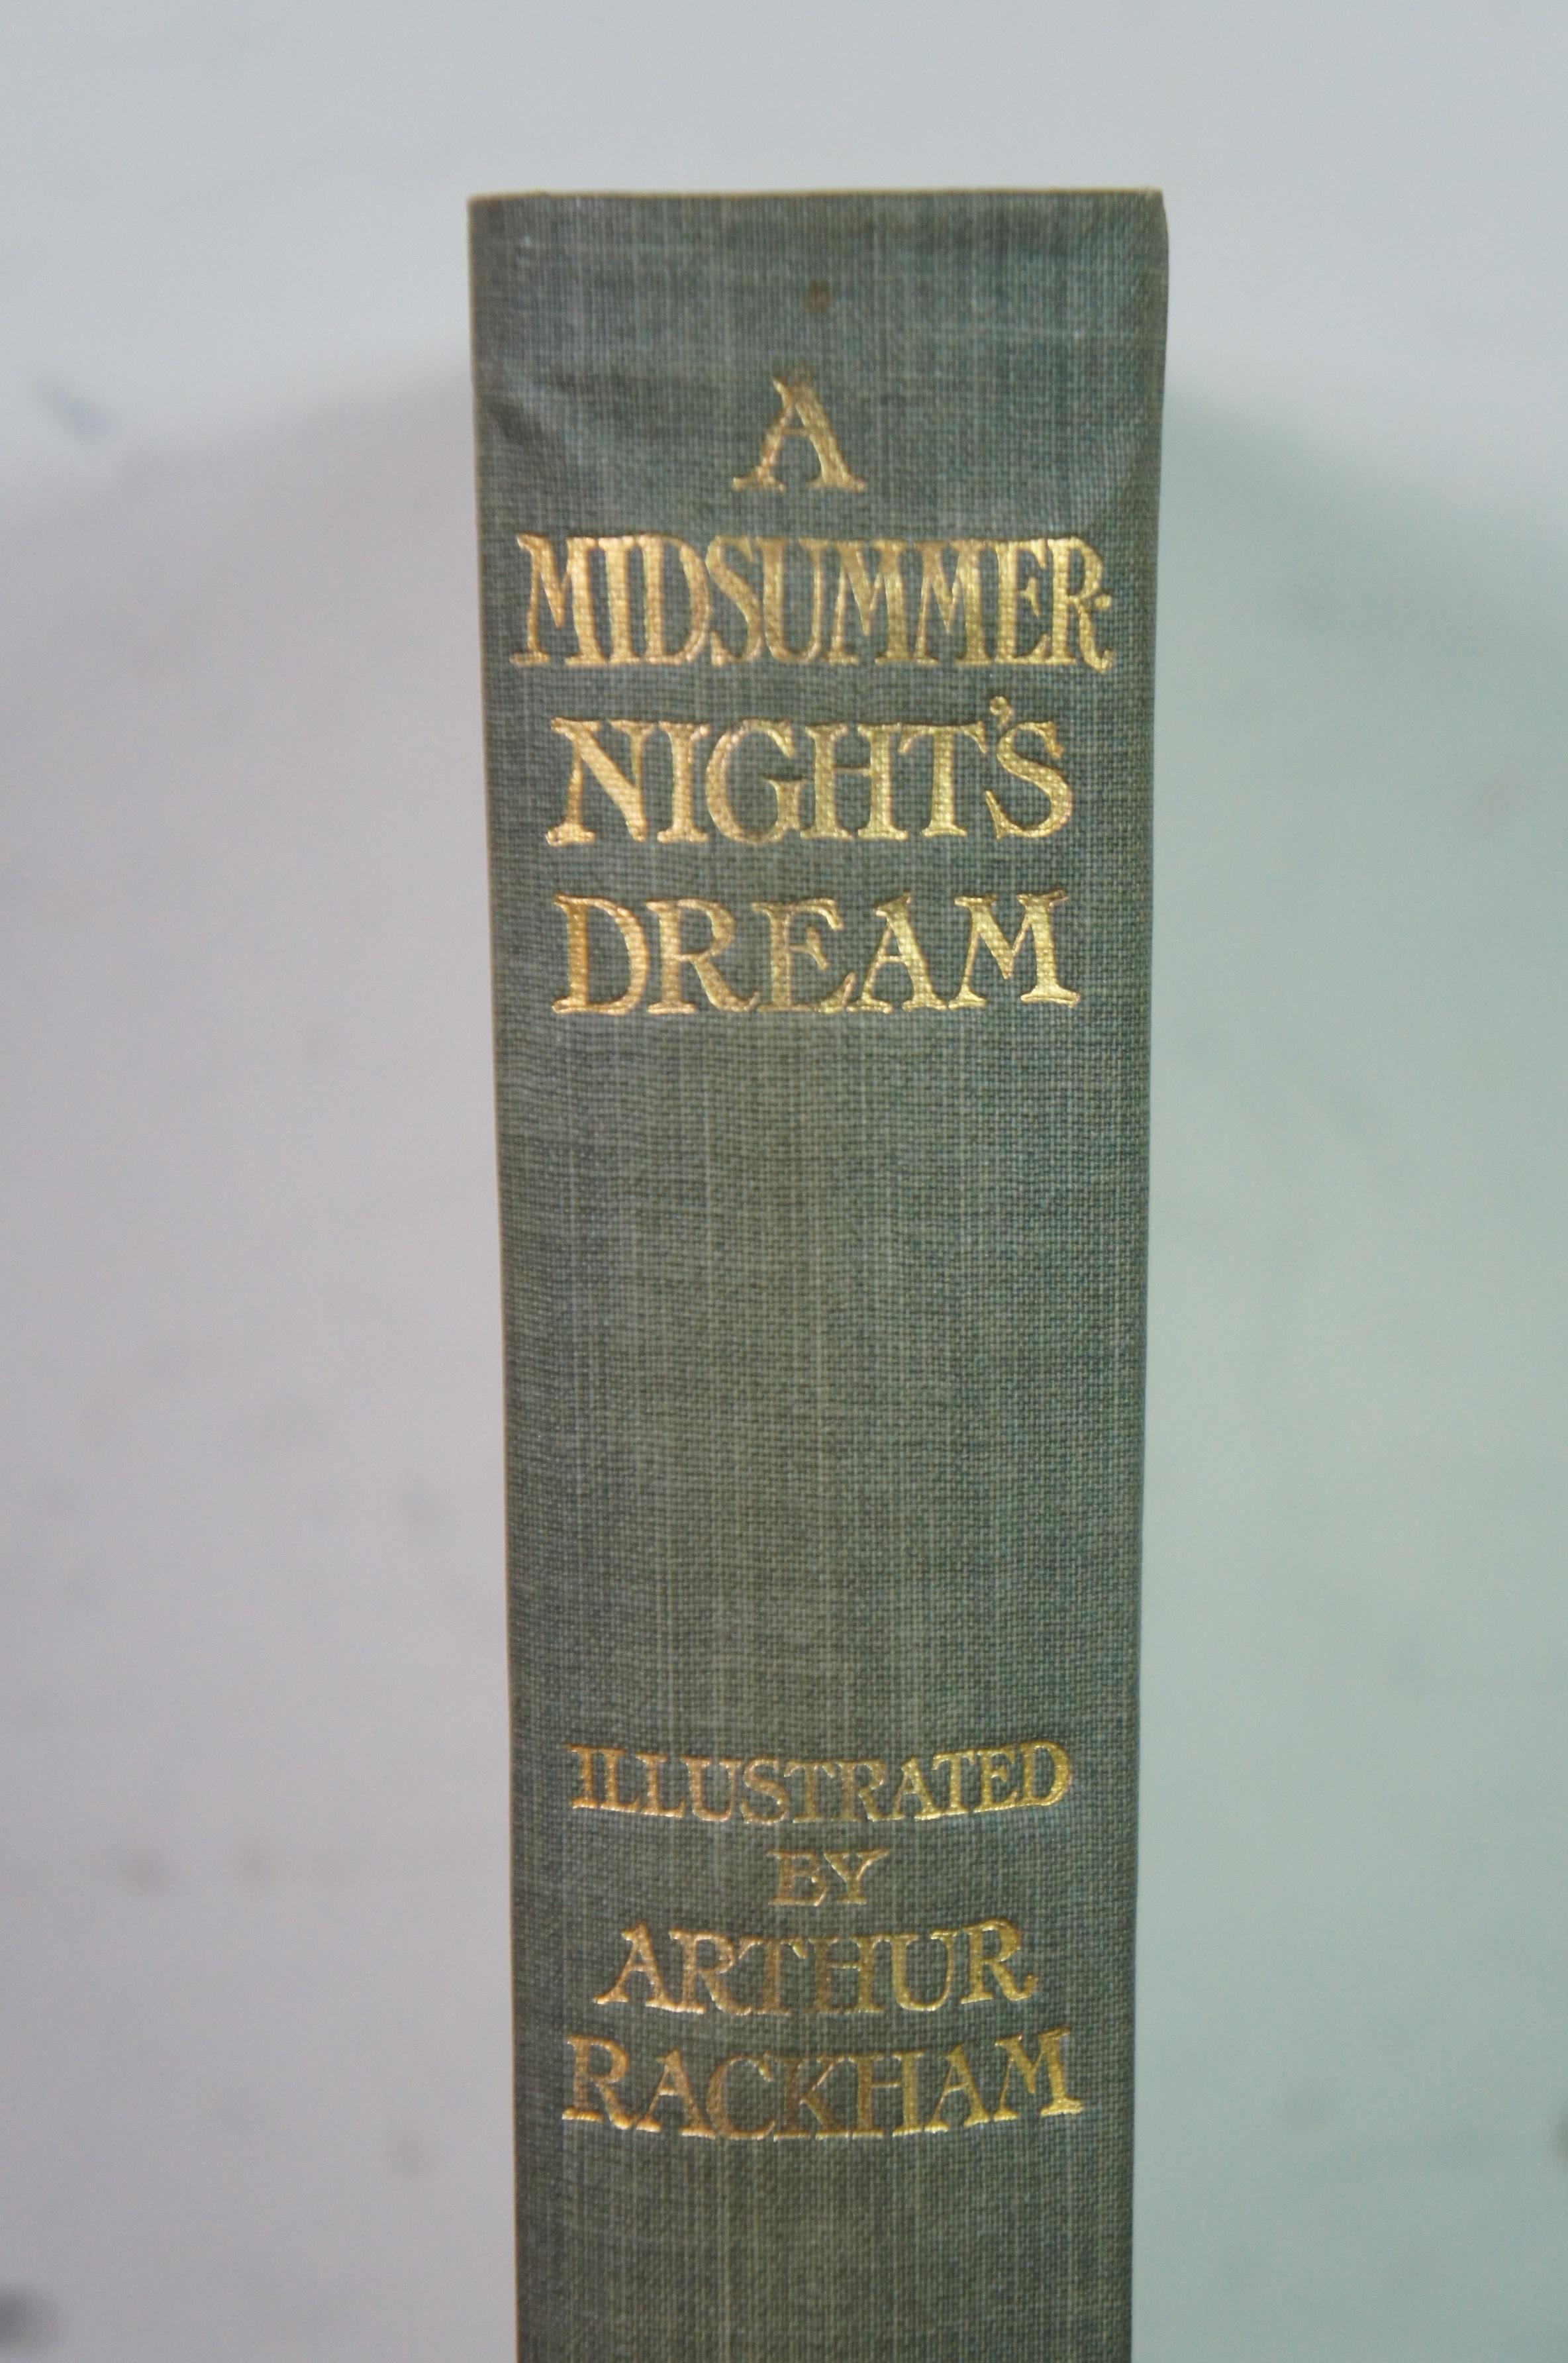 how many pages is a midsummer night's dream